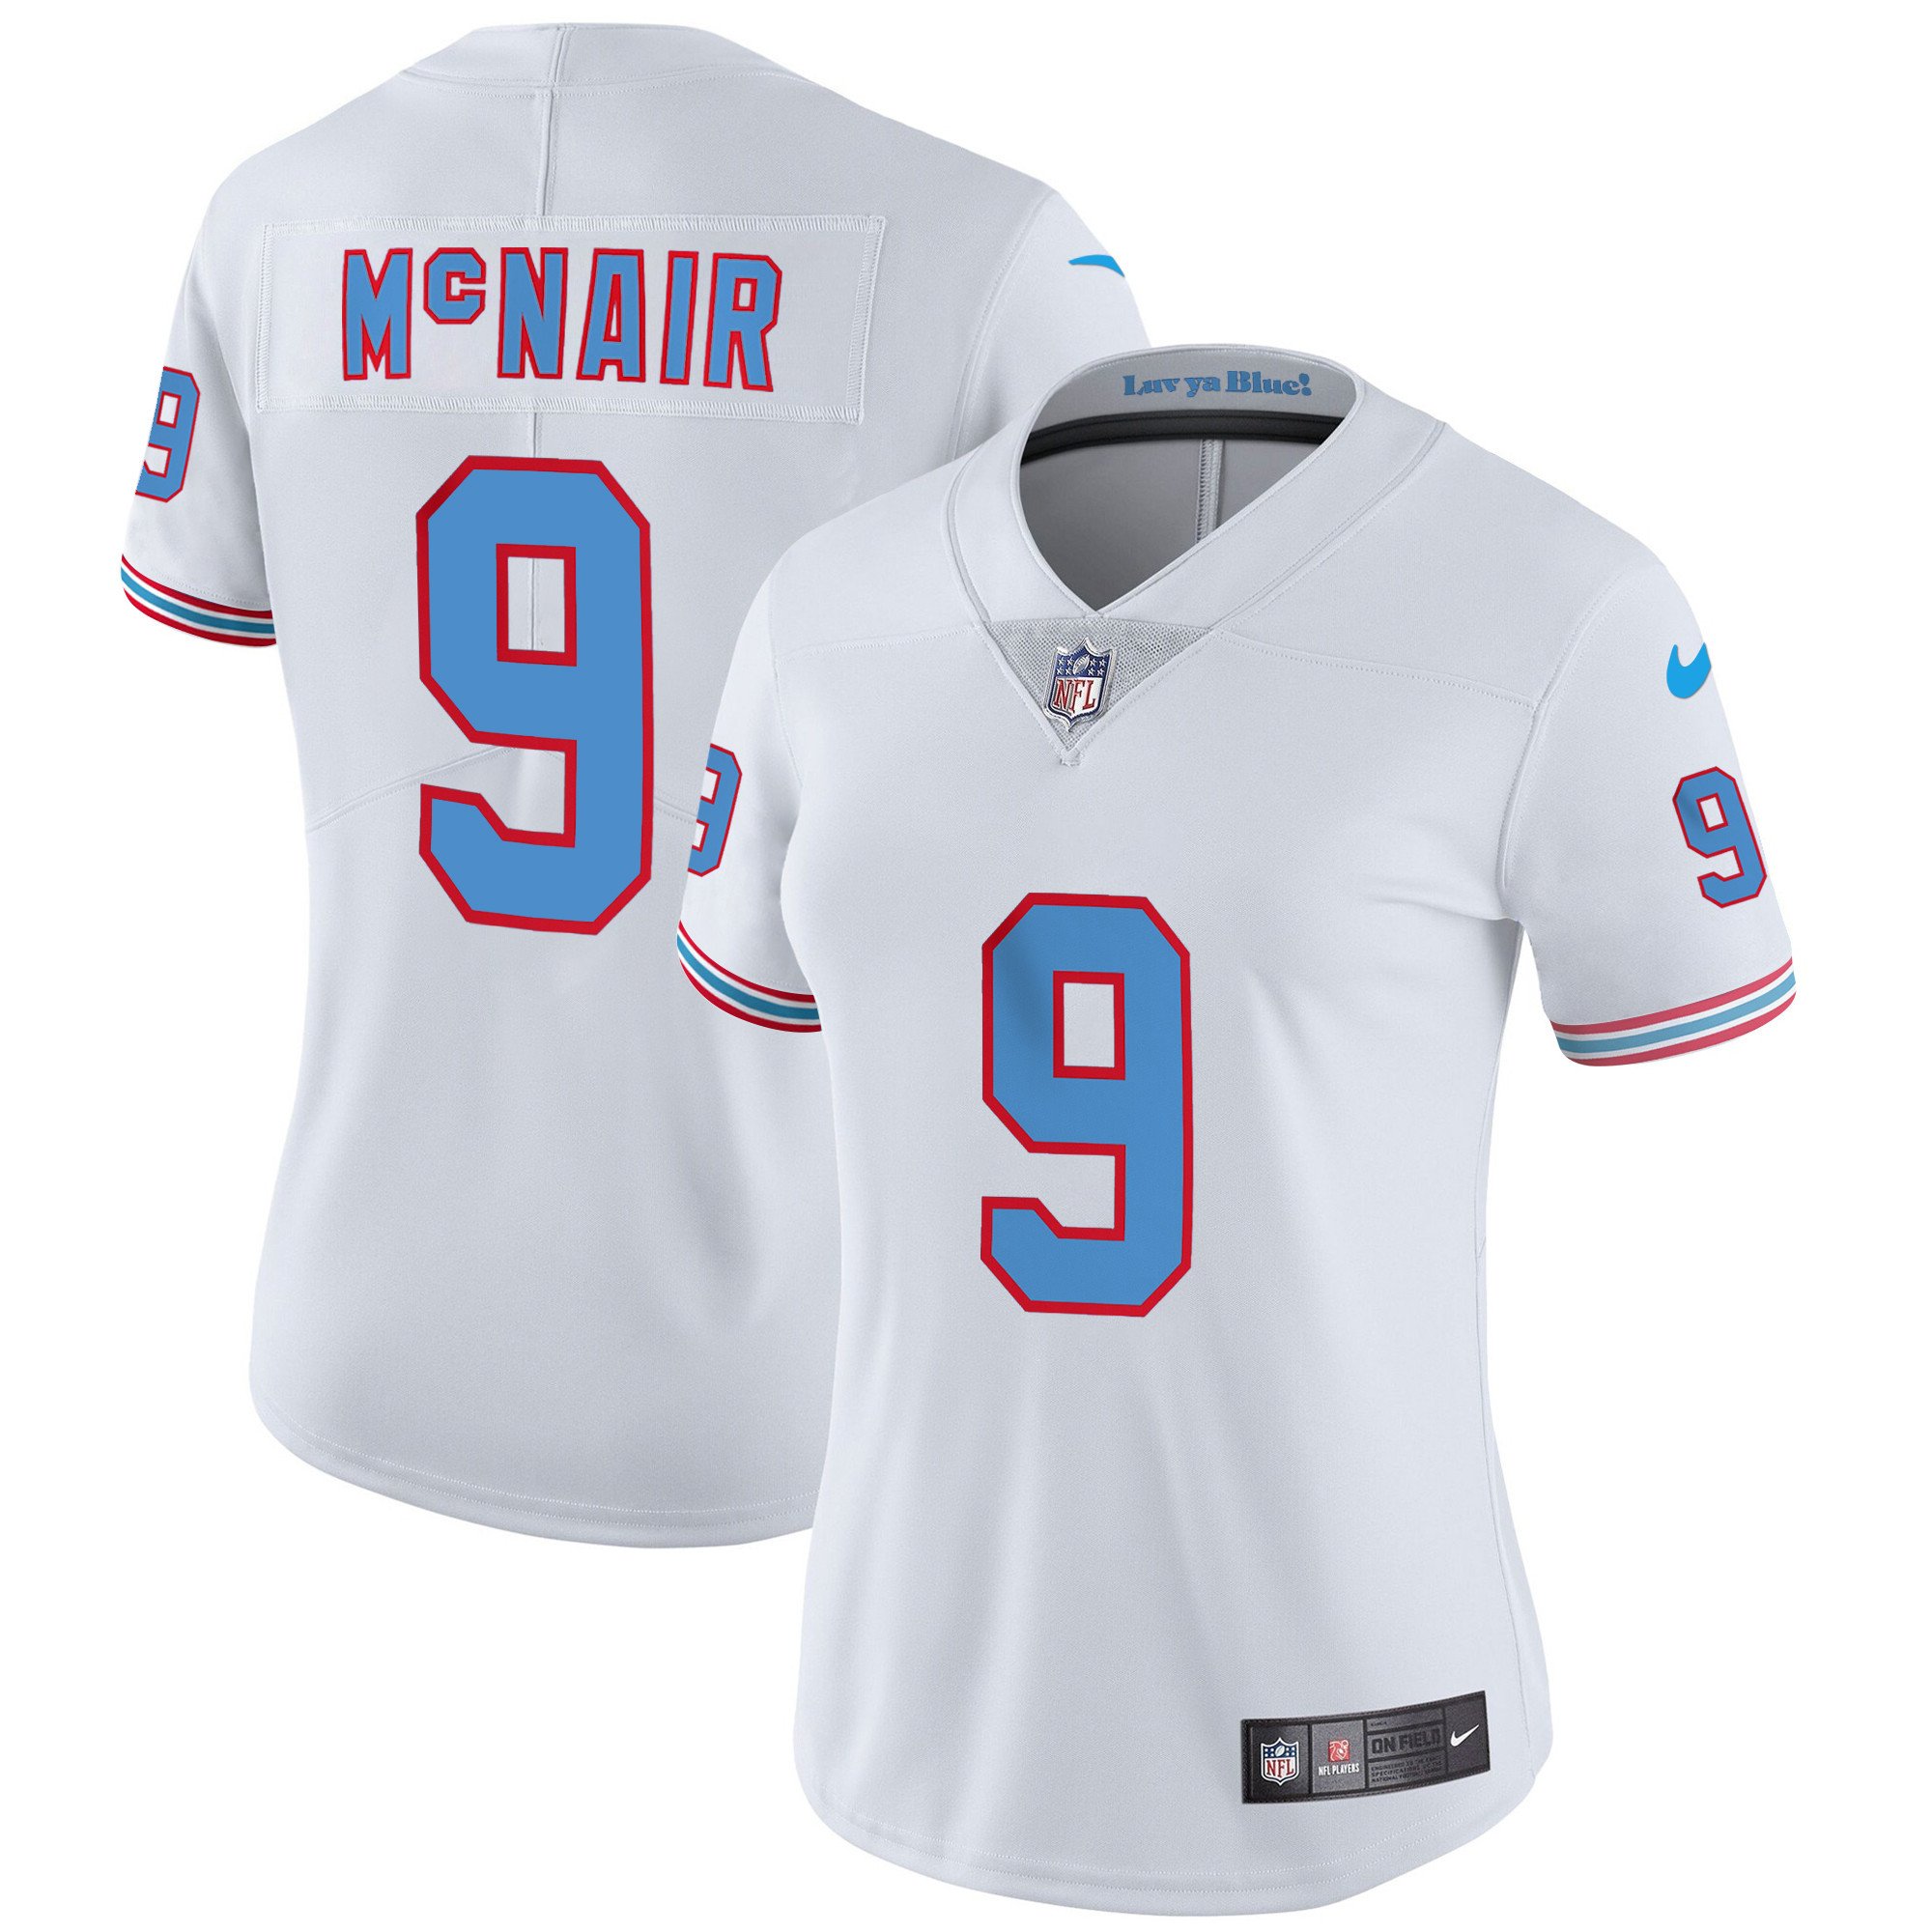 Women's Titans Throwback Limited Vapor Jersey - All Stitched - Nebgift